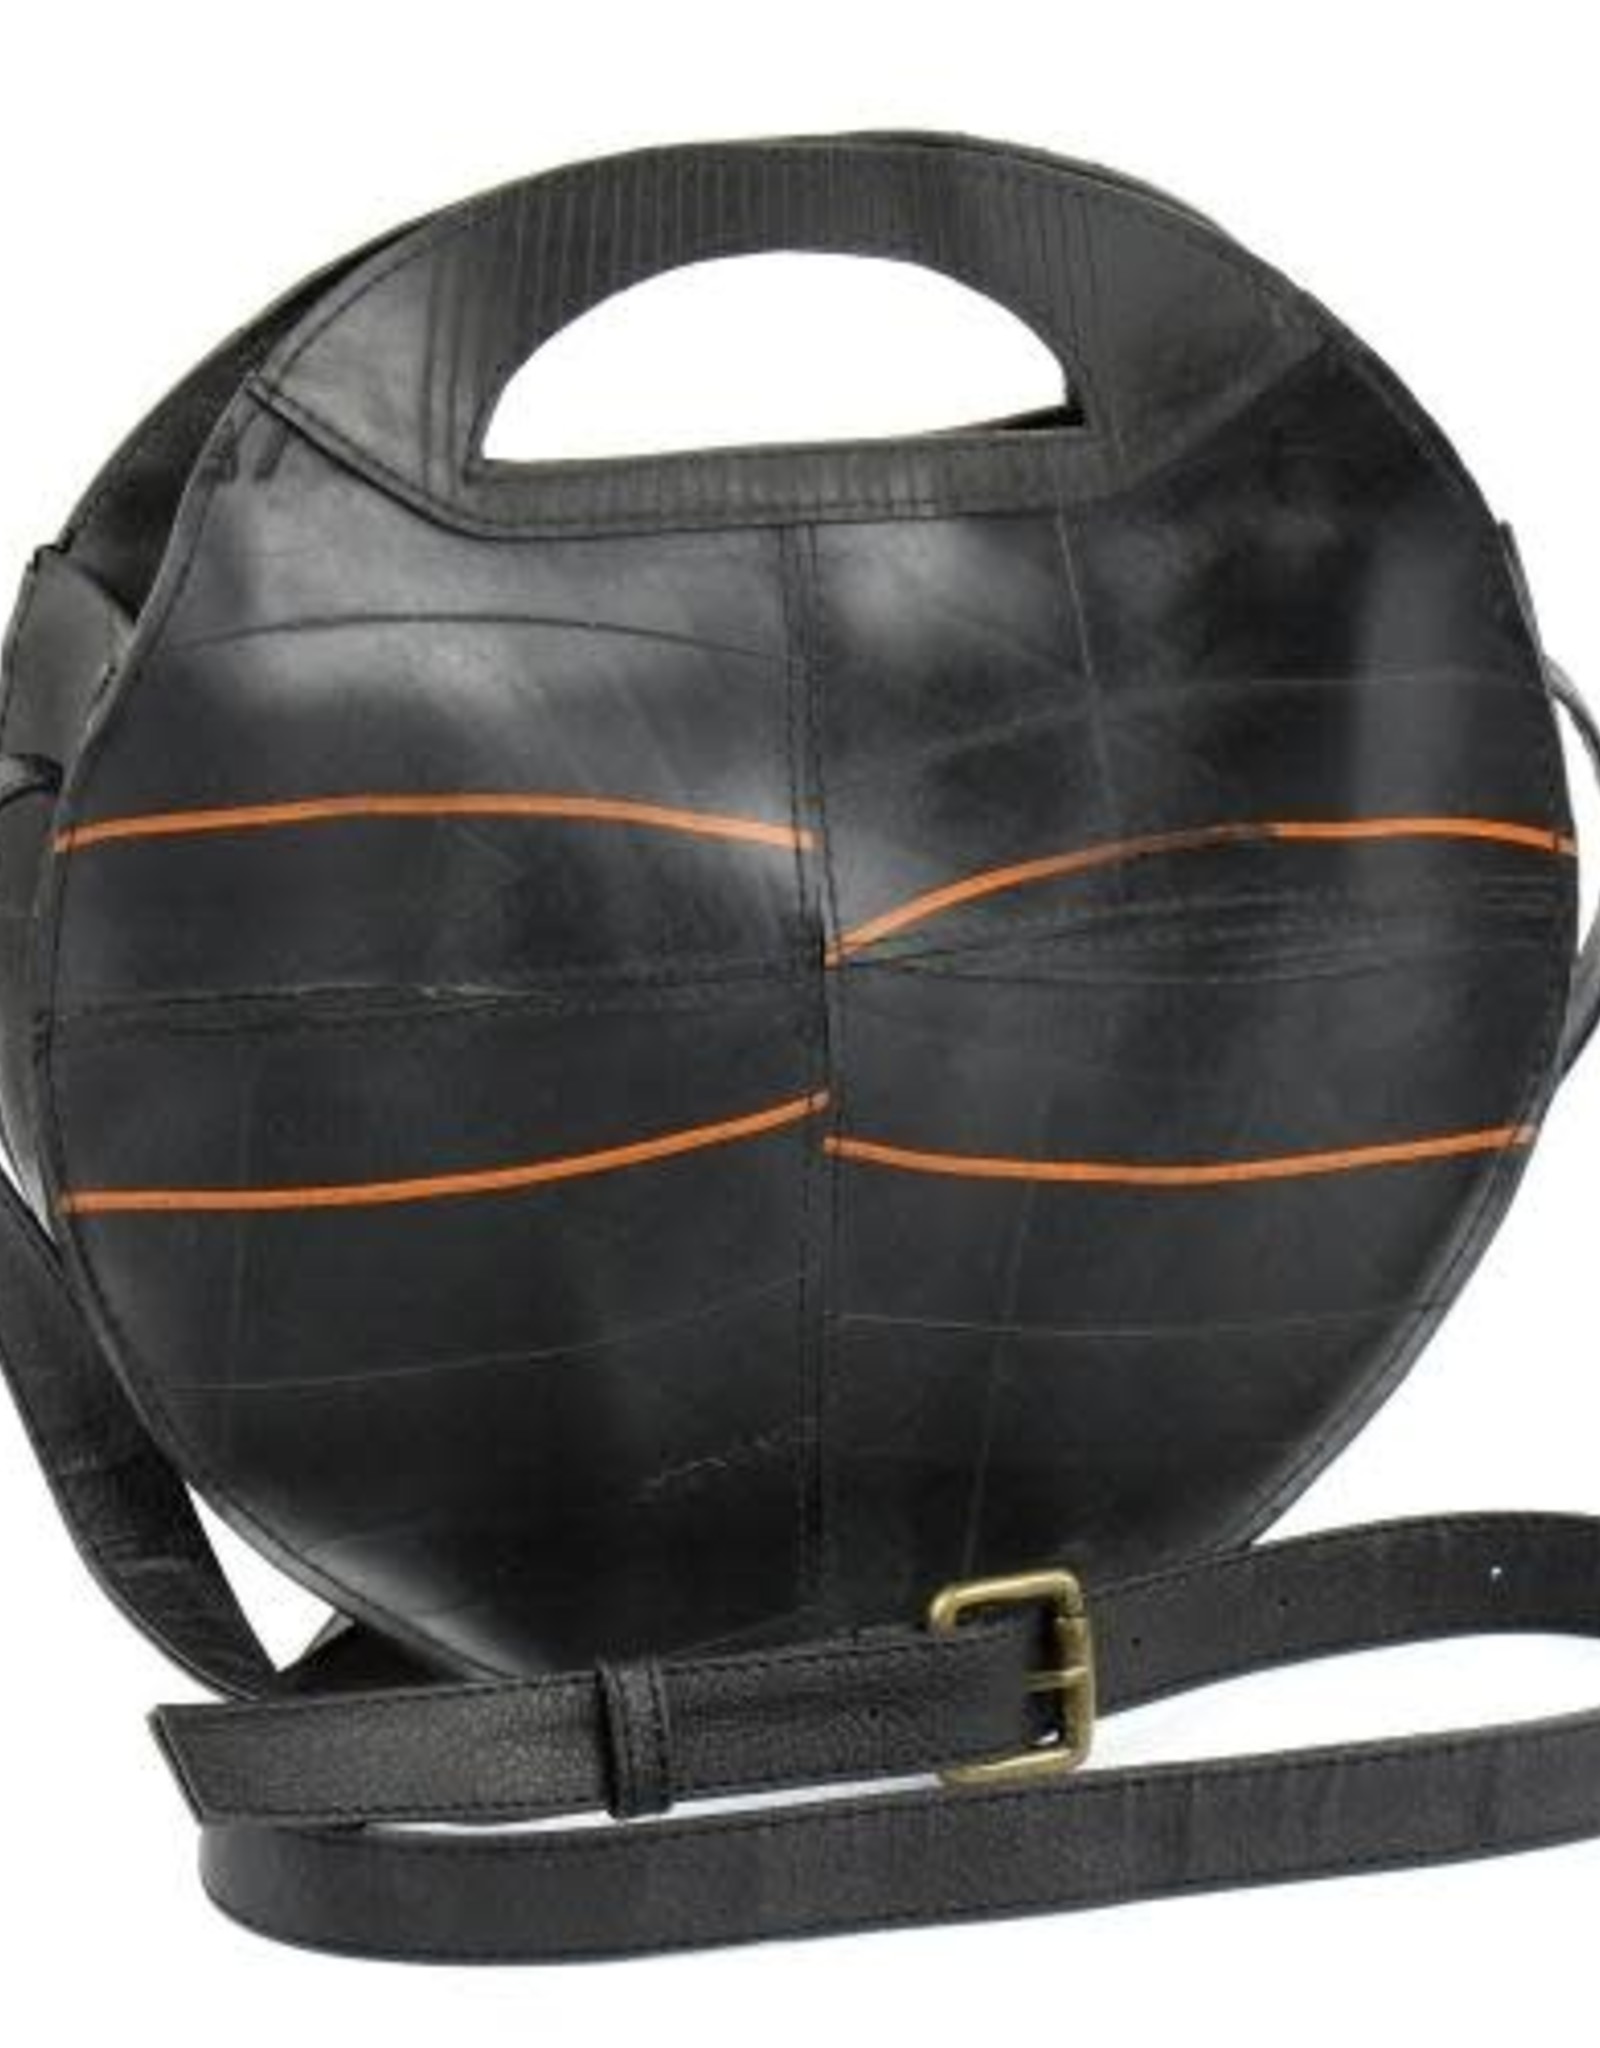 Global Crafts Bag, Shoulder Recycled Rubber Round Clutch